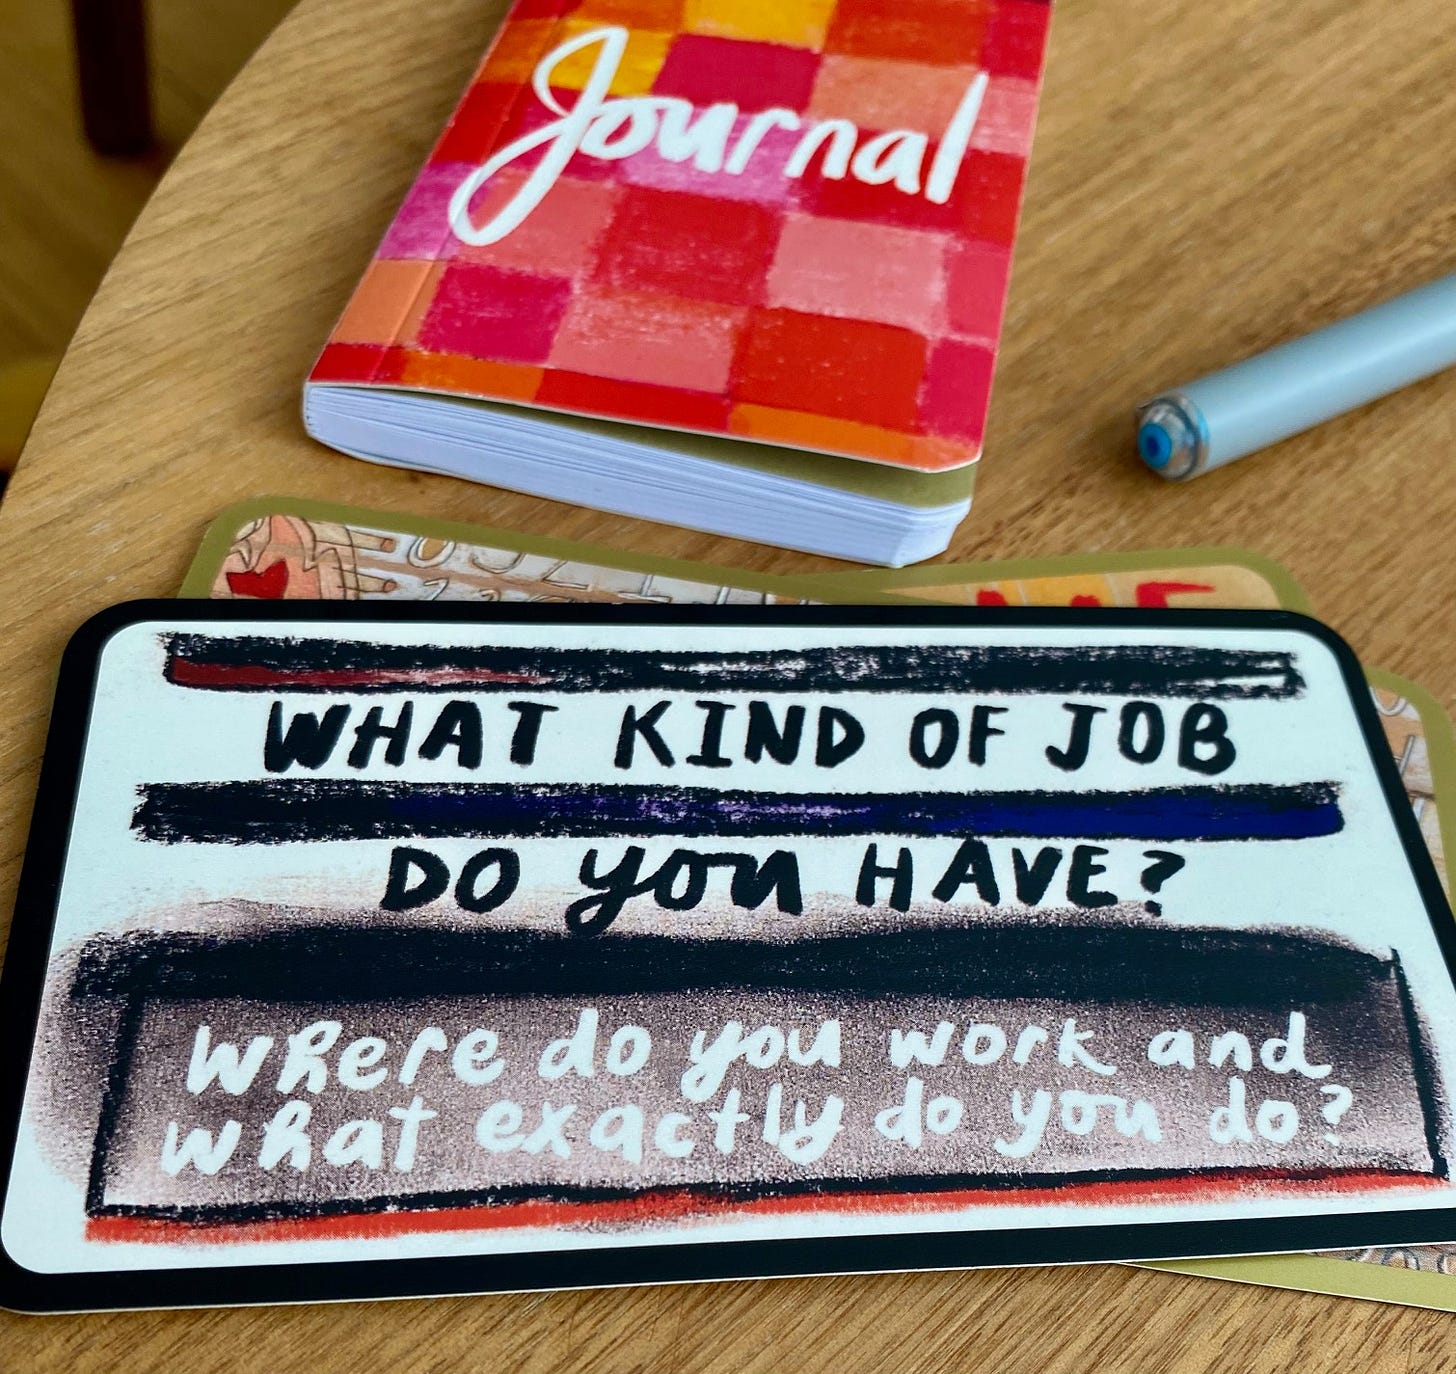 Image of card that reads: What kind of job do you have? Journal and pen in background.